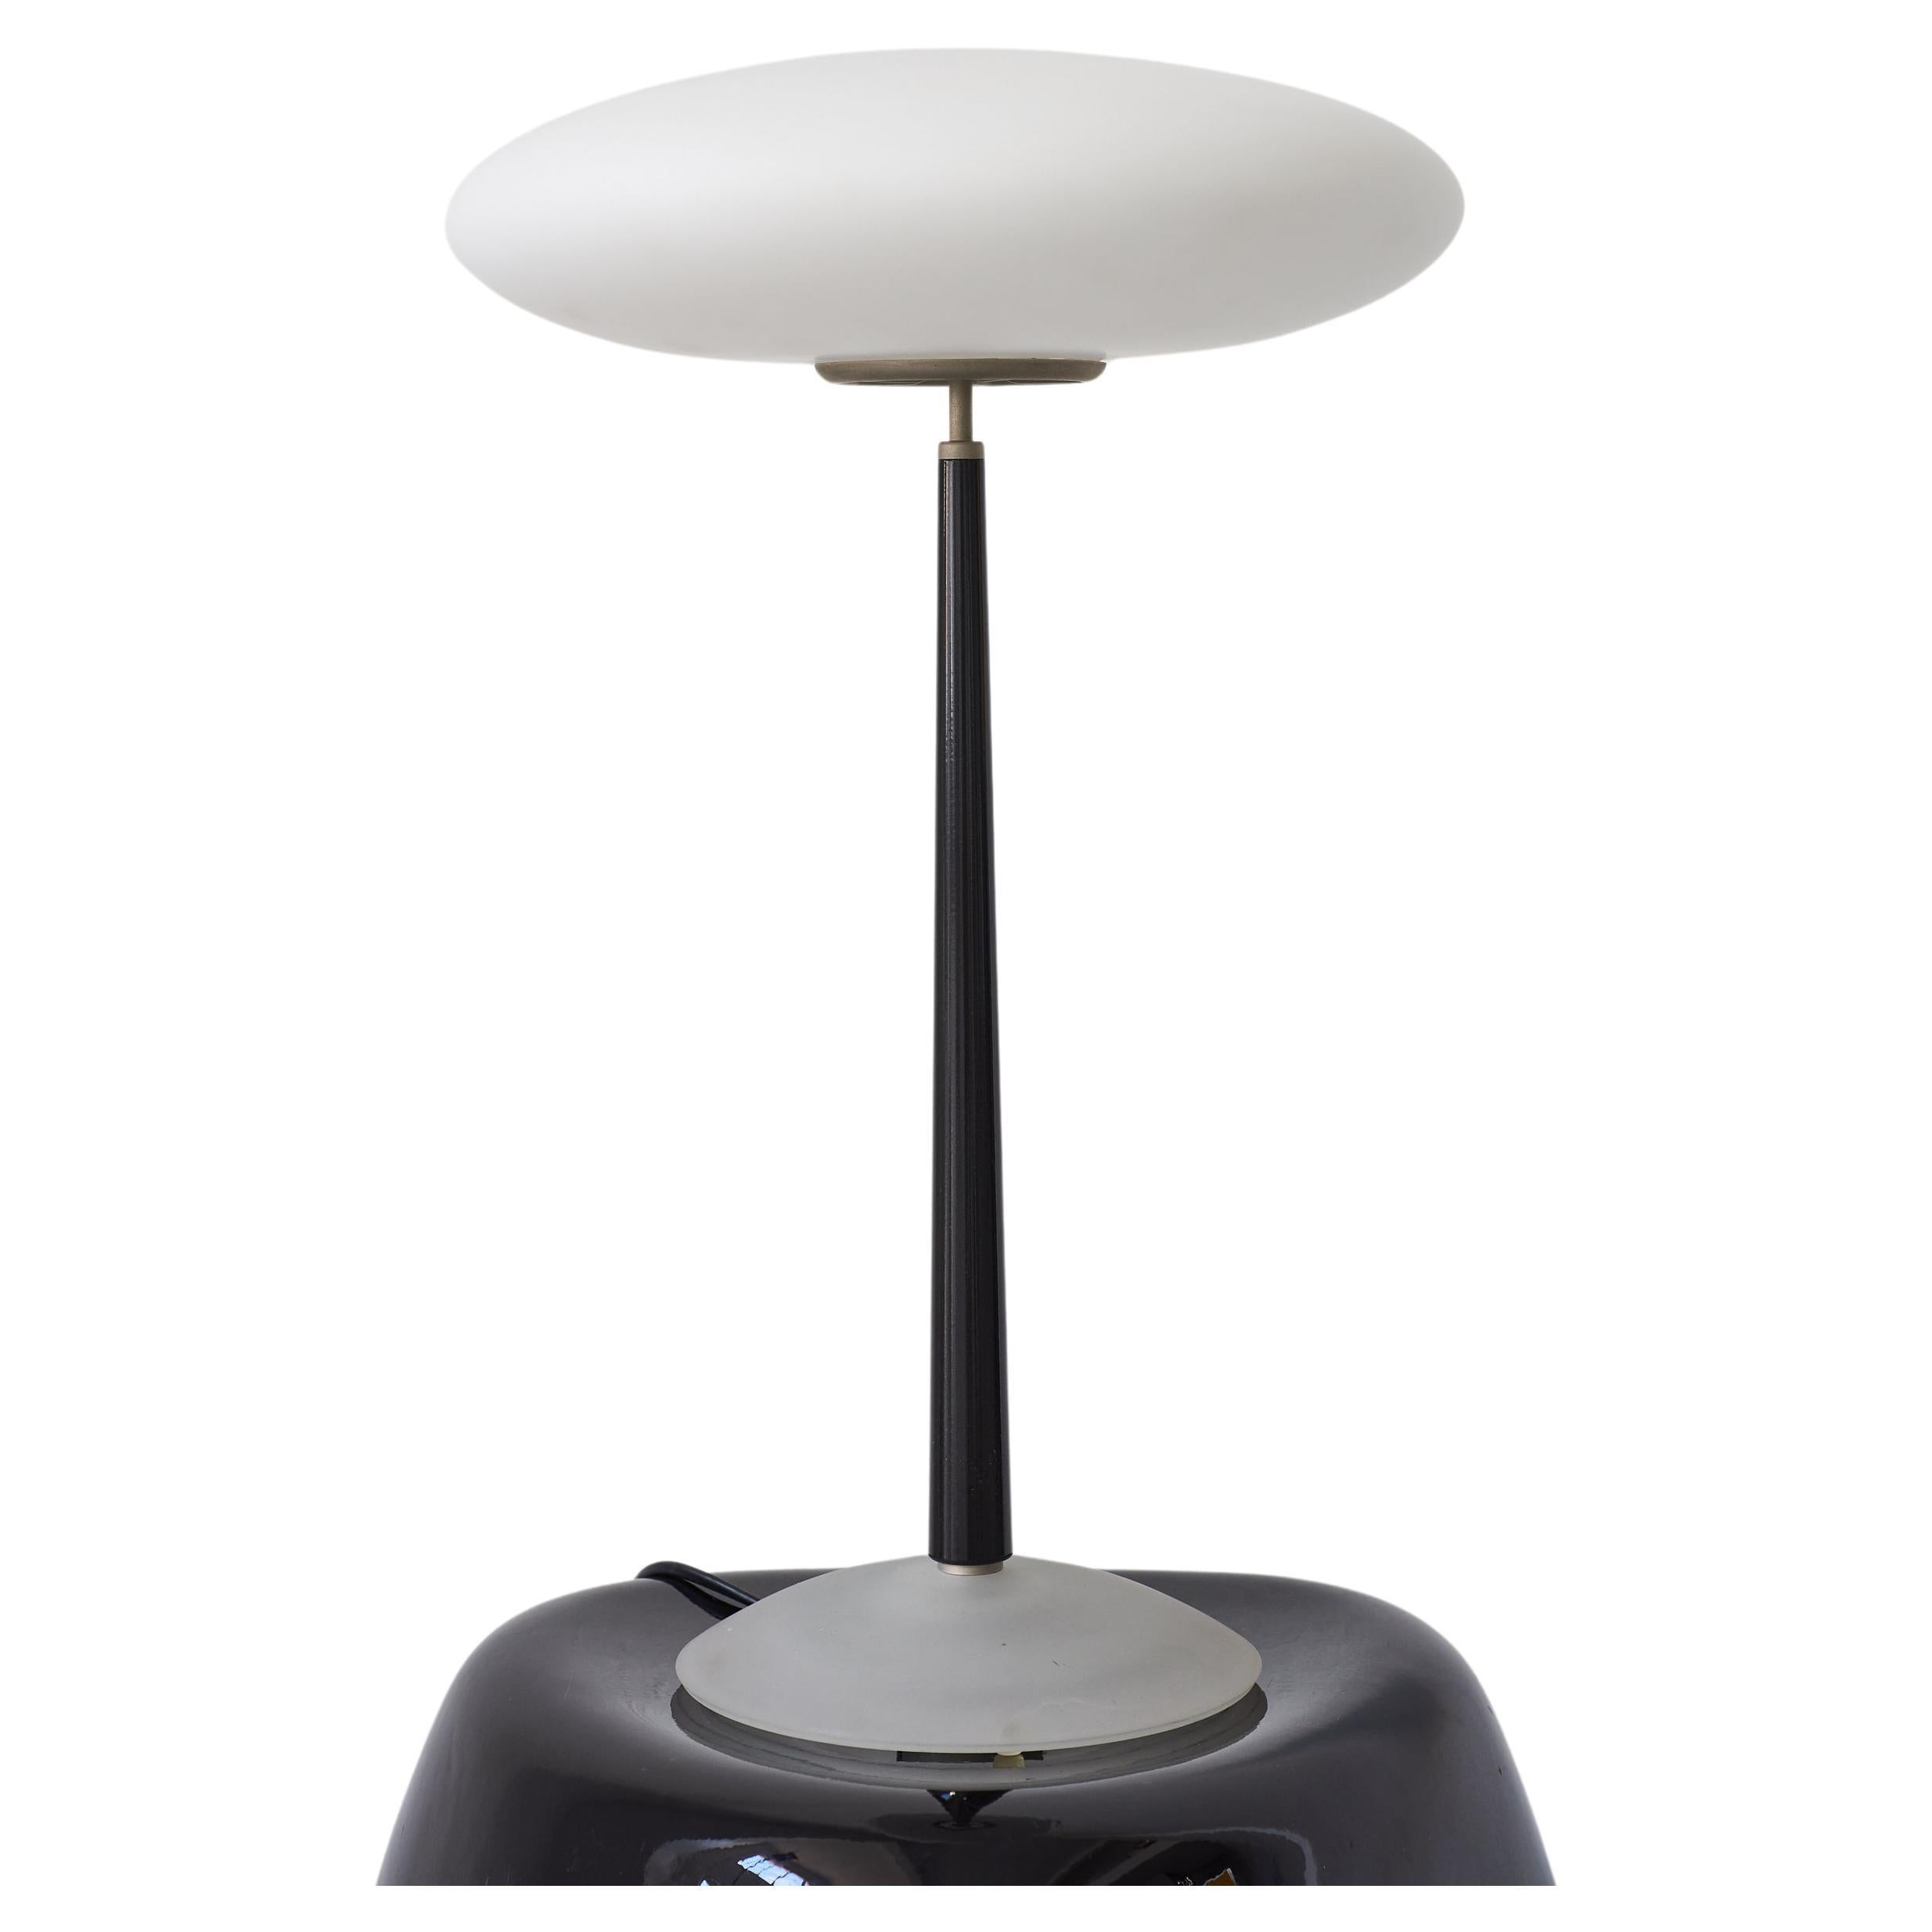 Pao table lamp by Matteo Thun for Arteluce, 1993 For Sale